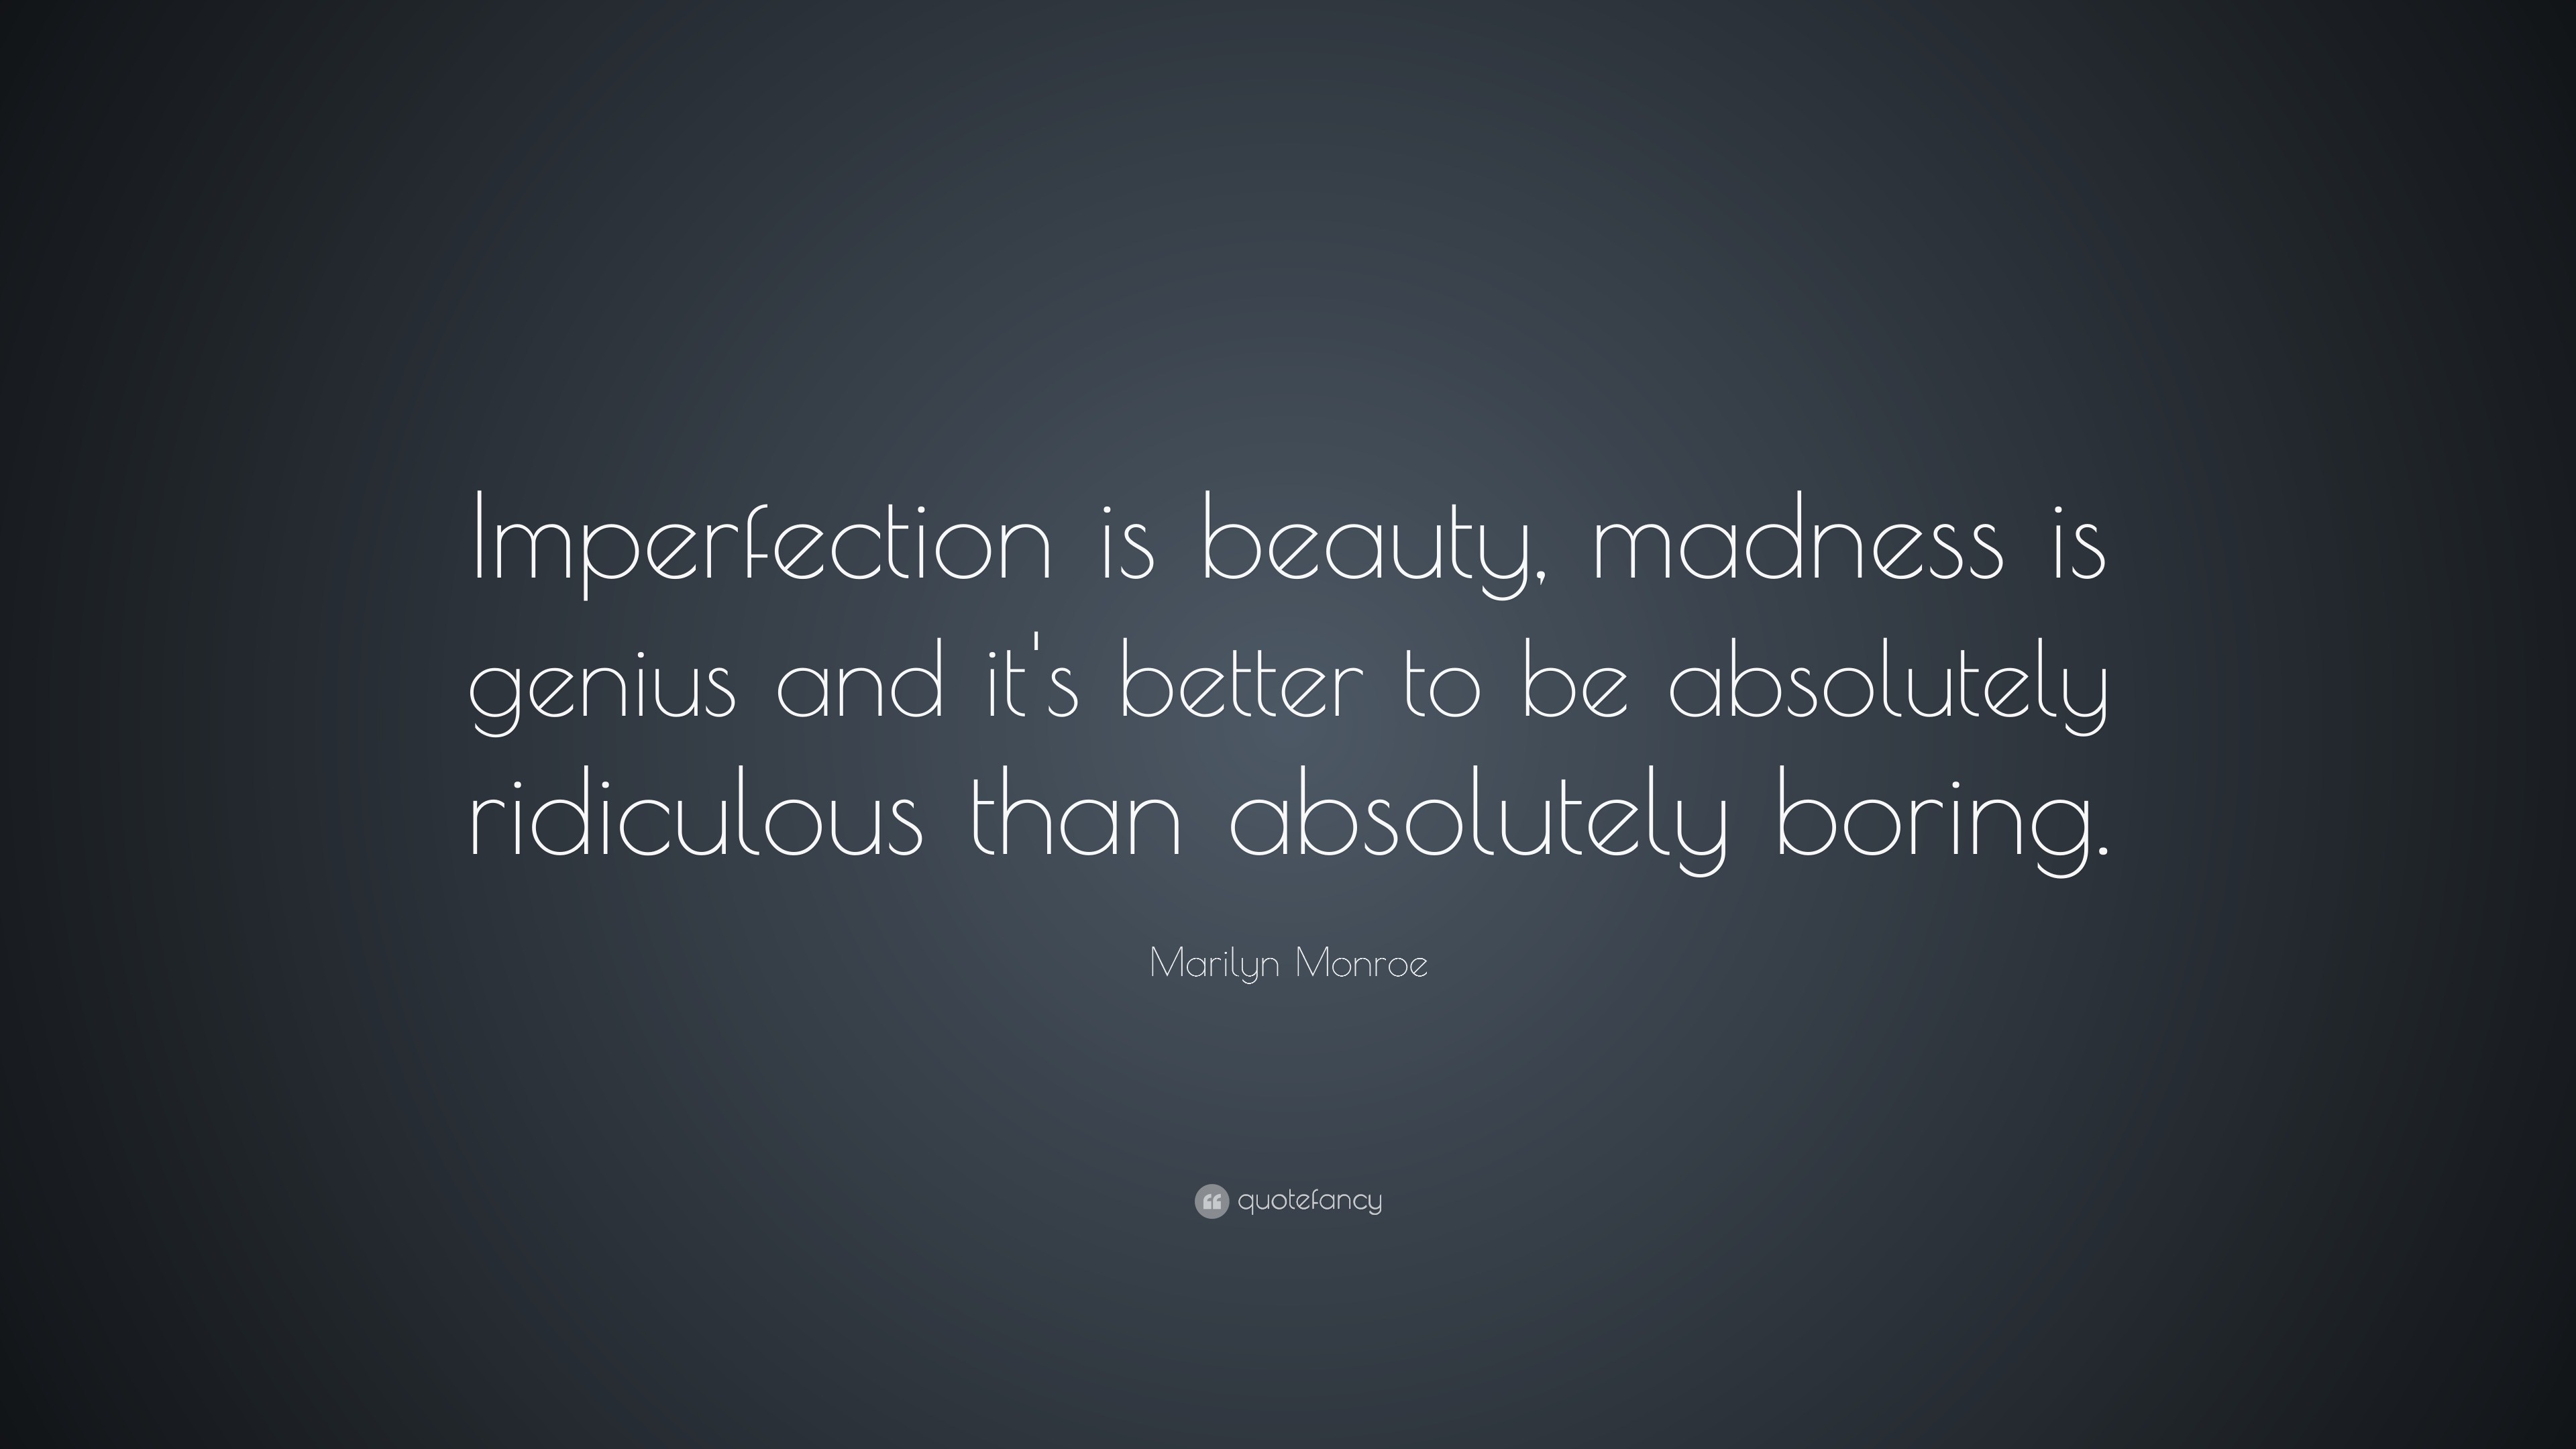 Hazelton Beauty Madness And Genius Imperfection It Is